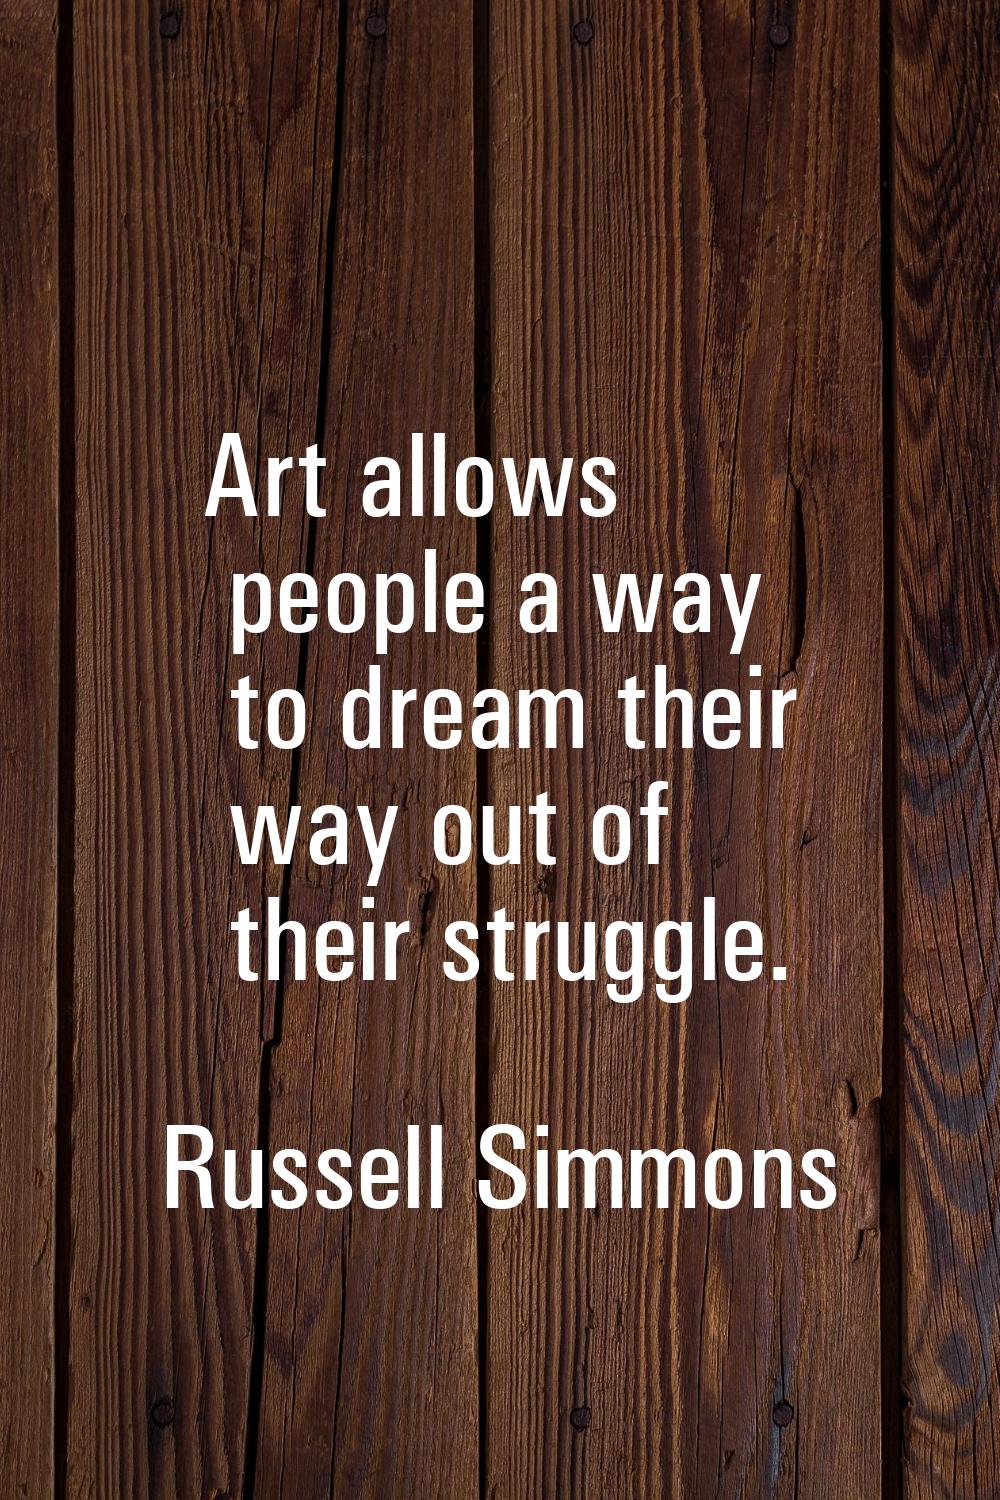 Art allows people a way to dream their way out of their struggle.